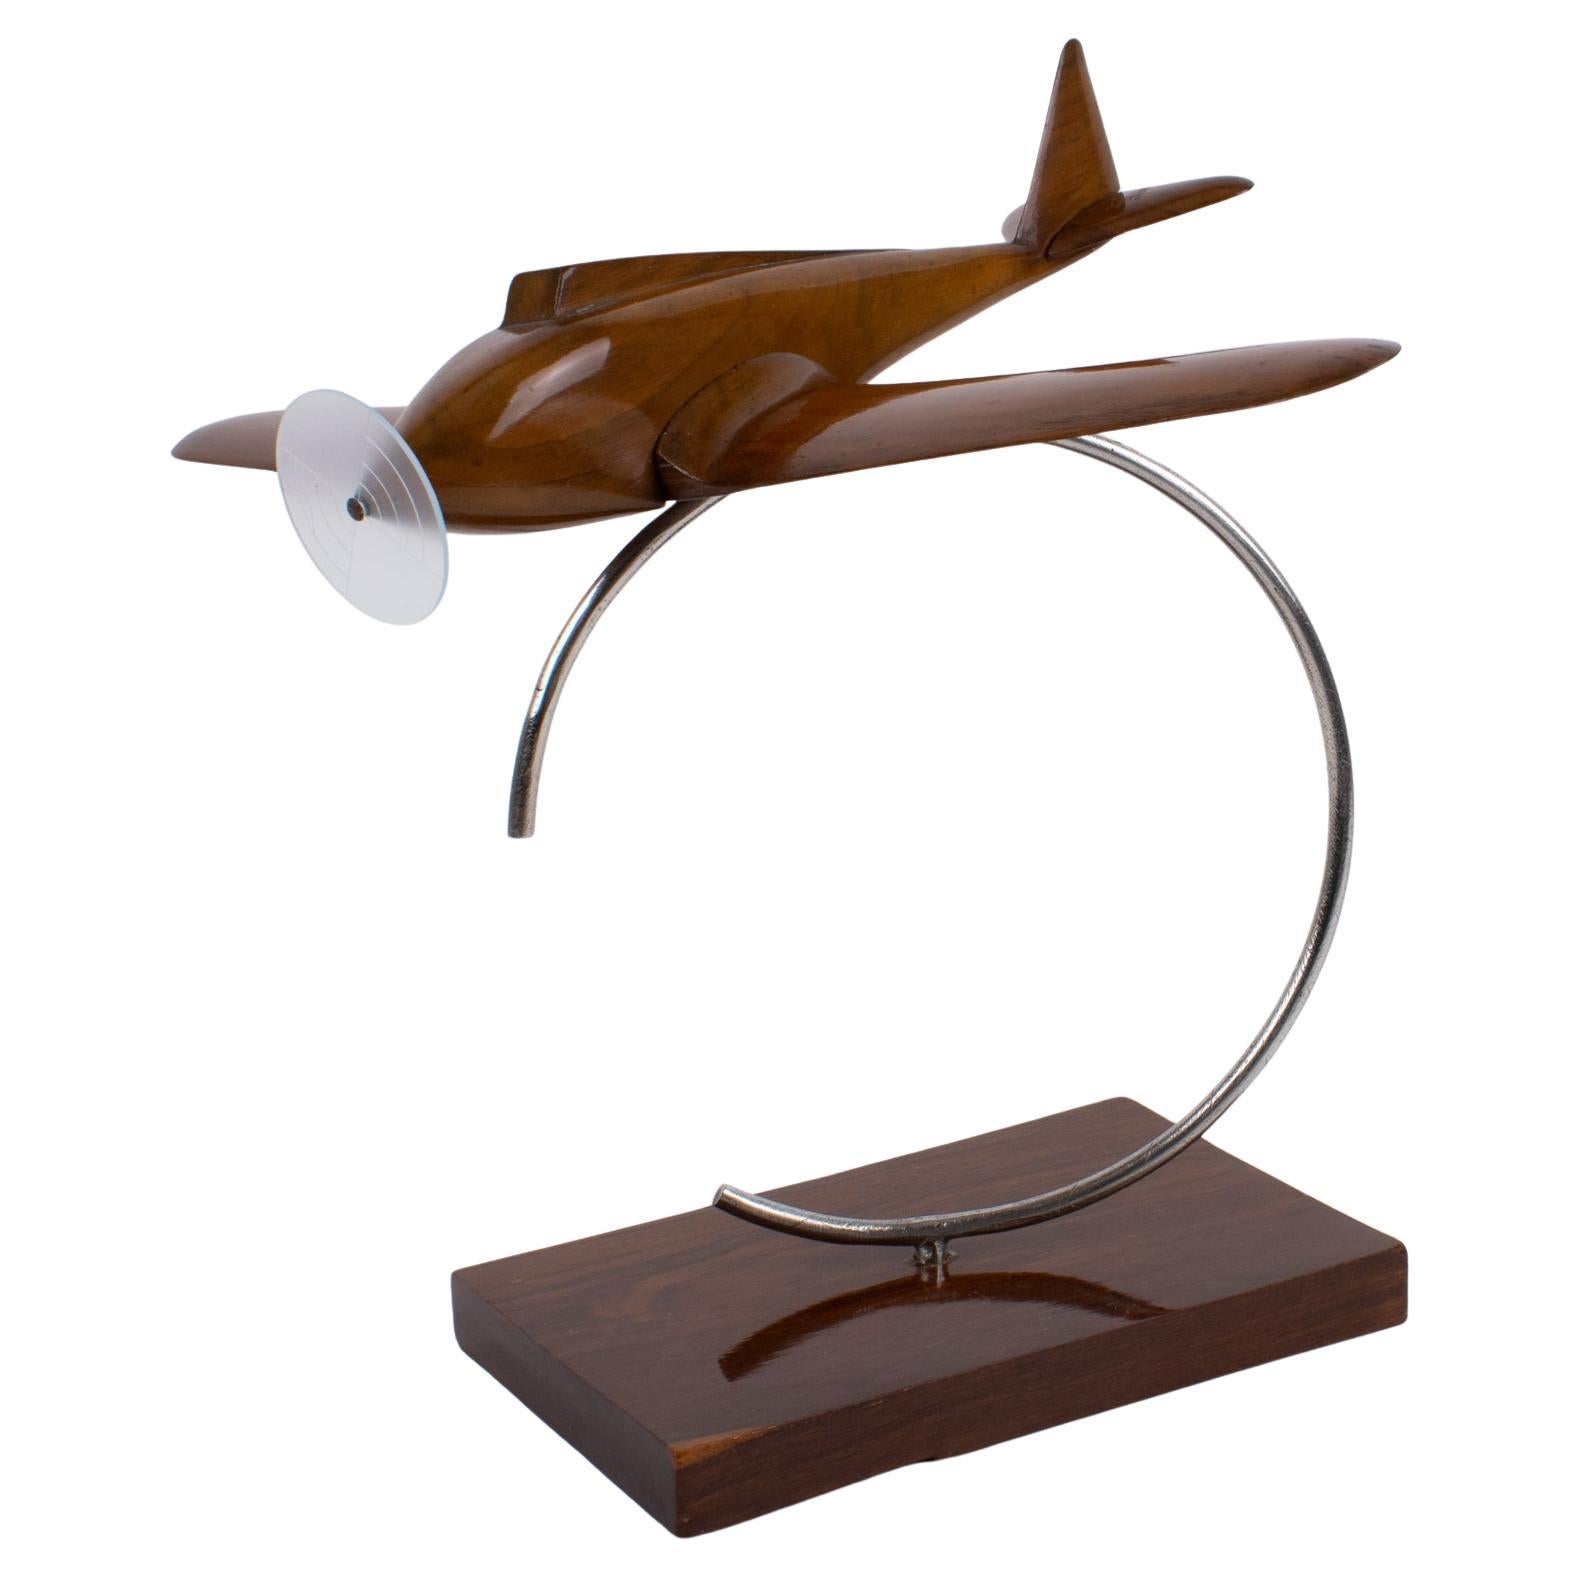 Art Deco Wood and Metal Airplane Aviation Propeller Model, France 1930s For Sale